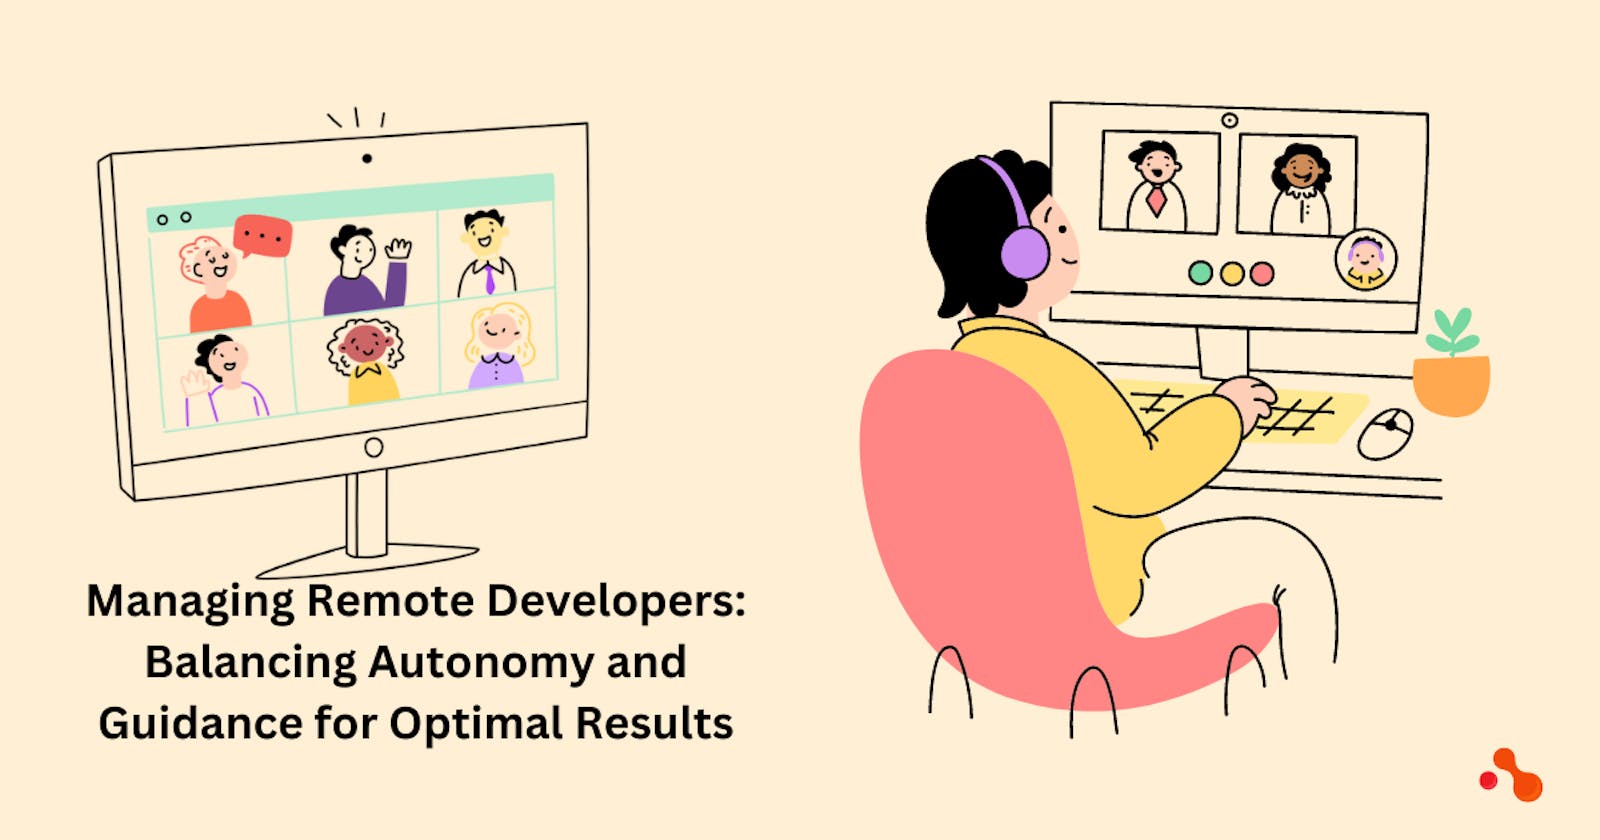 Managing Remote Developers: Balancing Autonomy and Guidance for Optimal Results